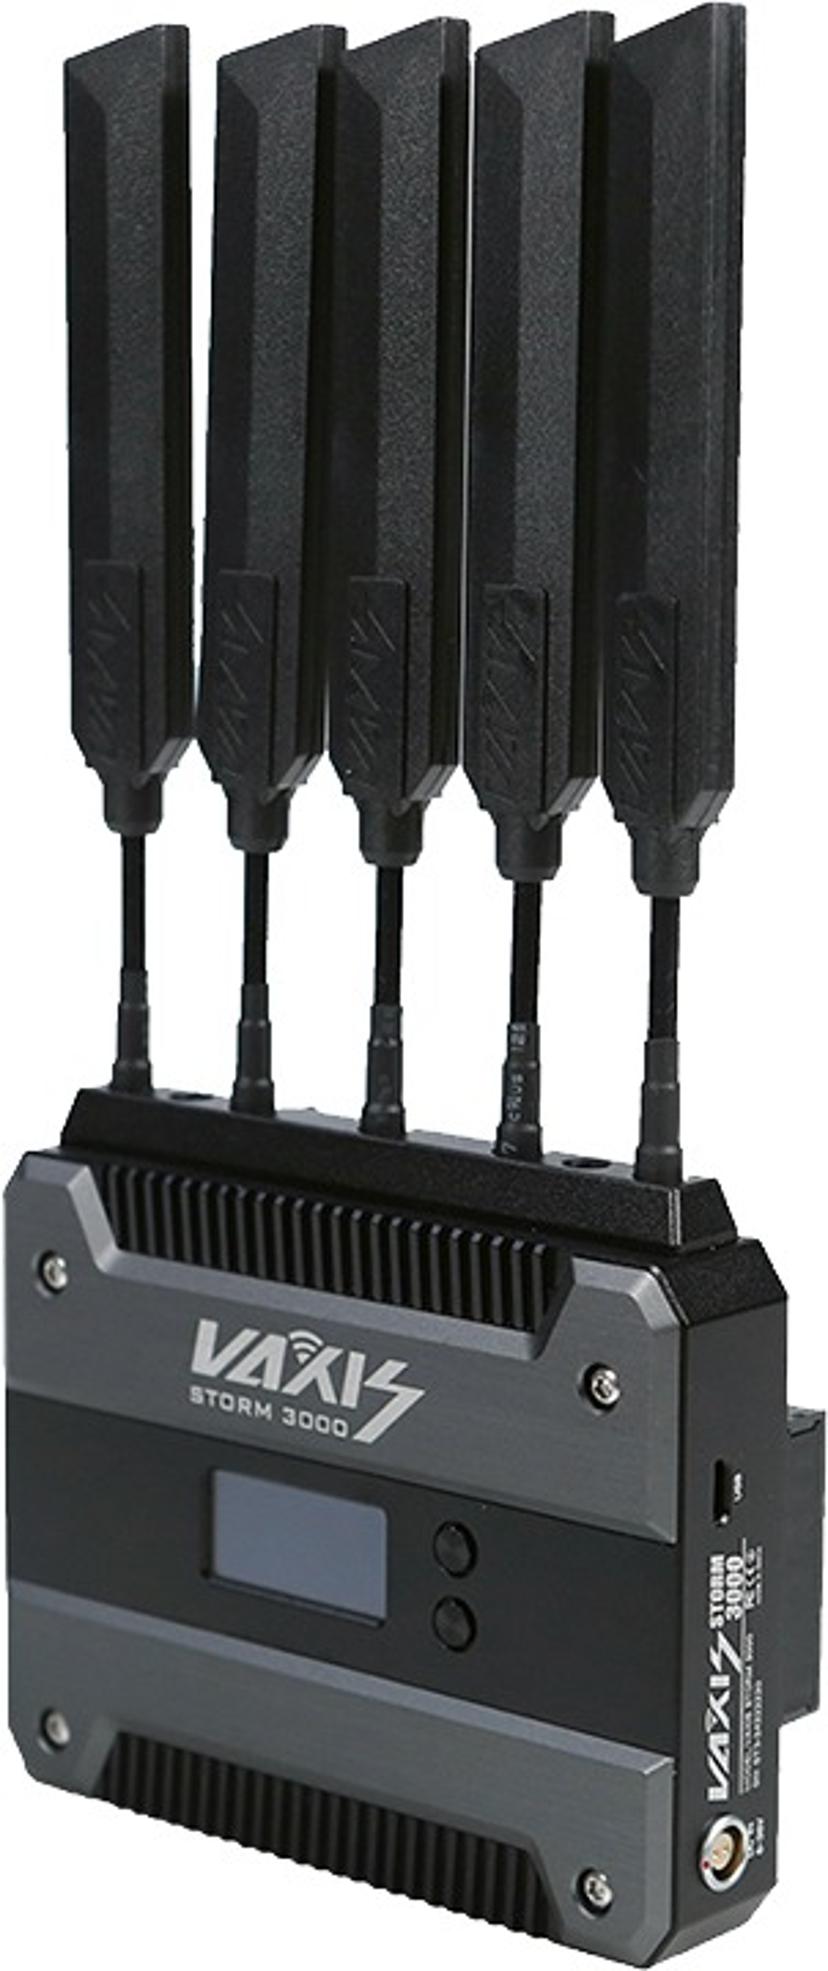 VAXIS Vaxis Storm 3000 Rx (V Mount)